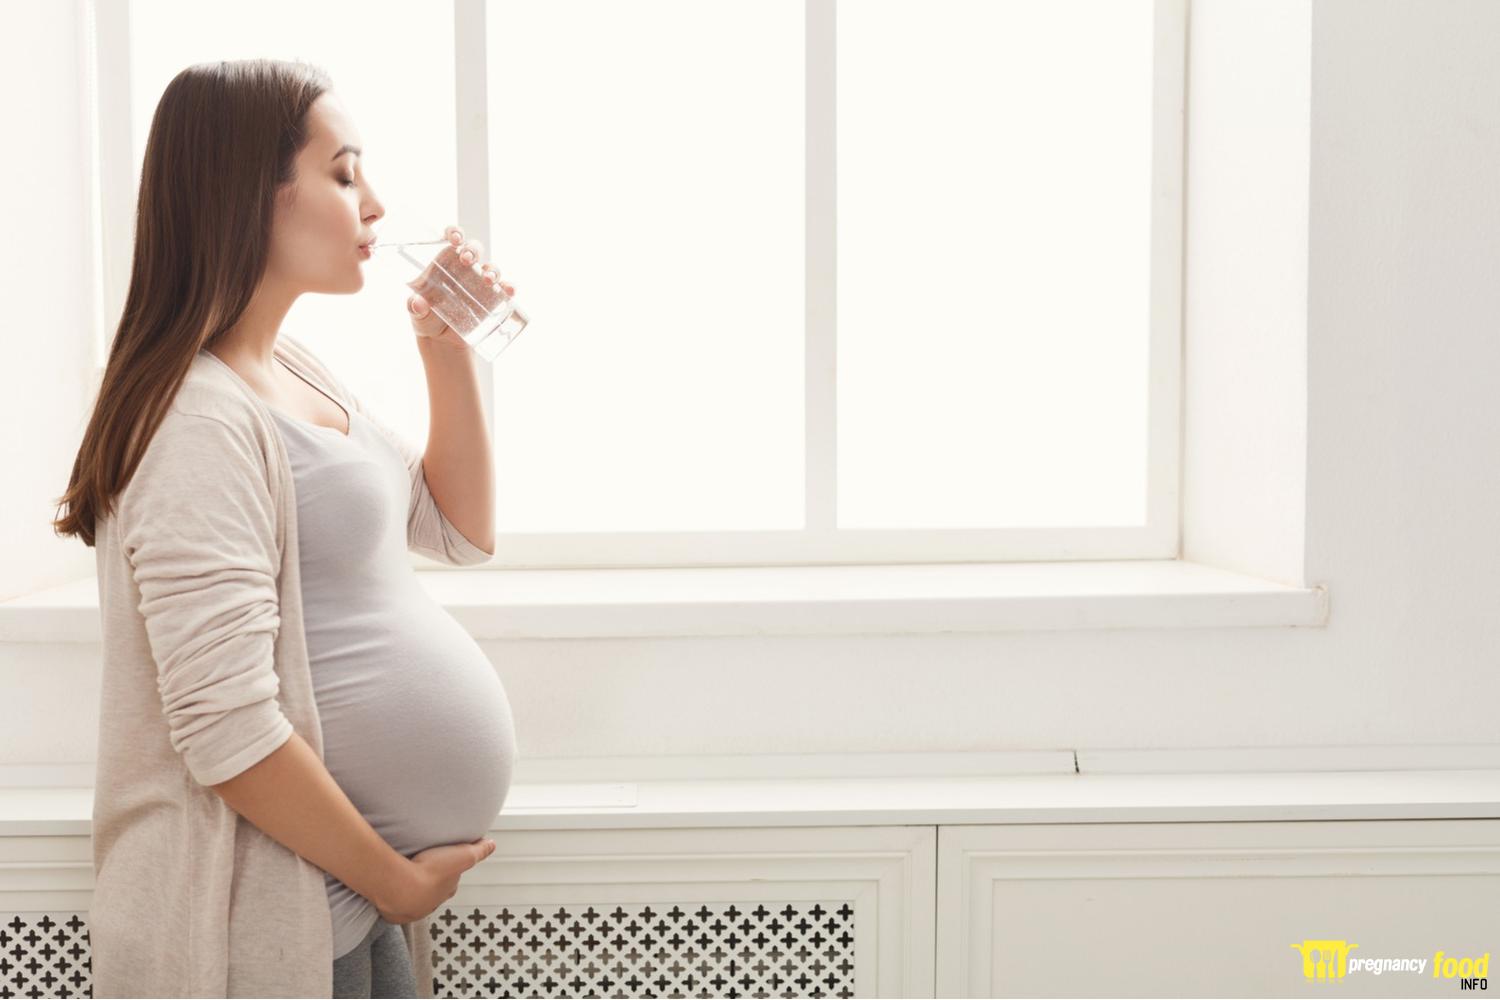 How Much Water Should a Pregnant Woman Drink?